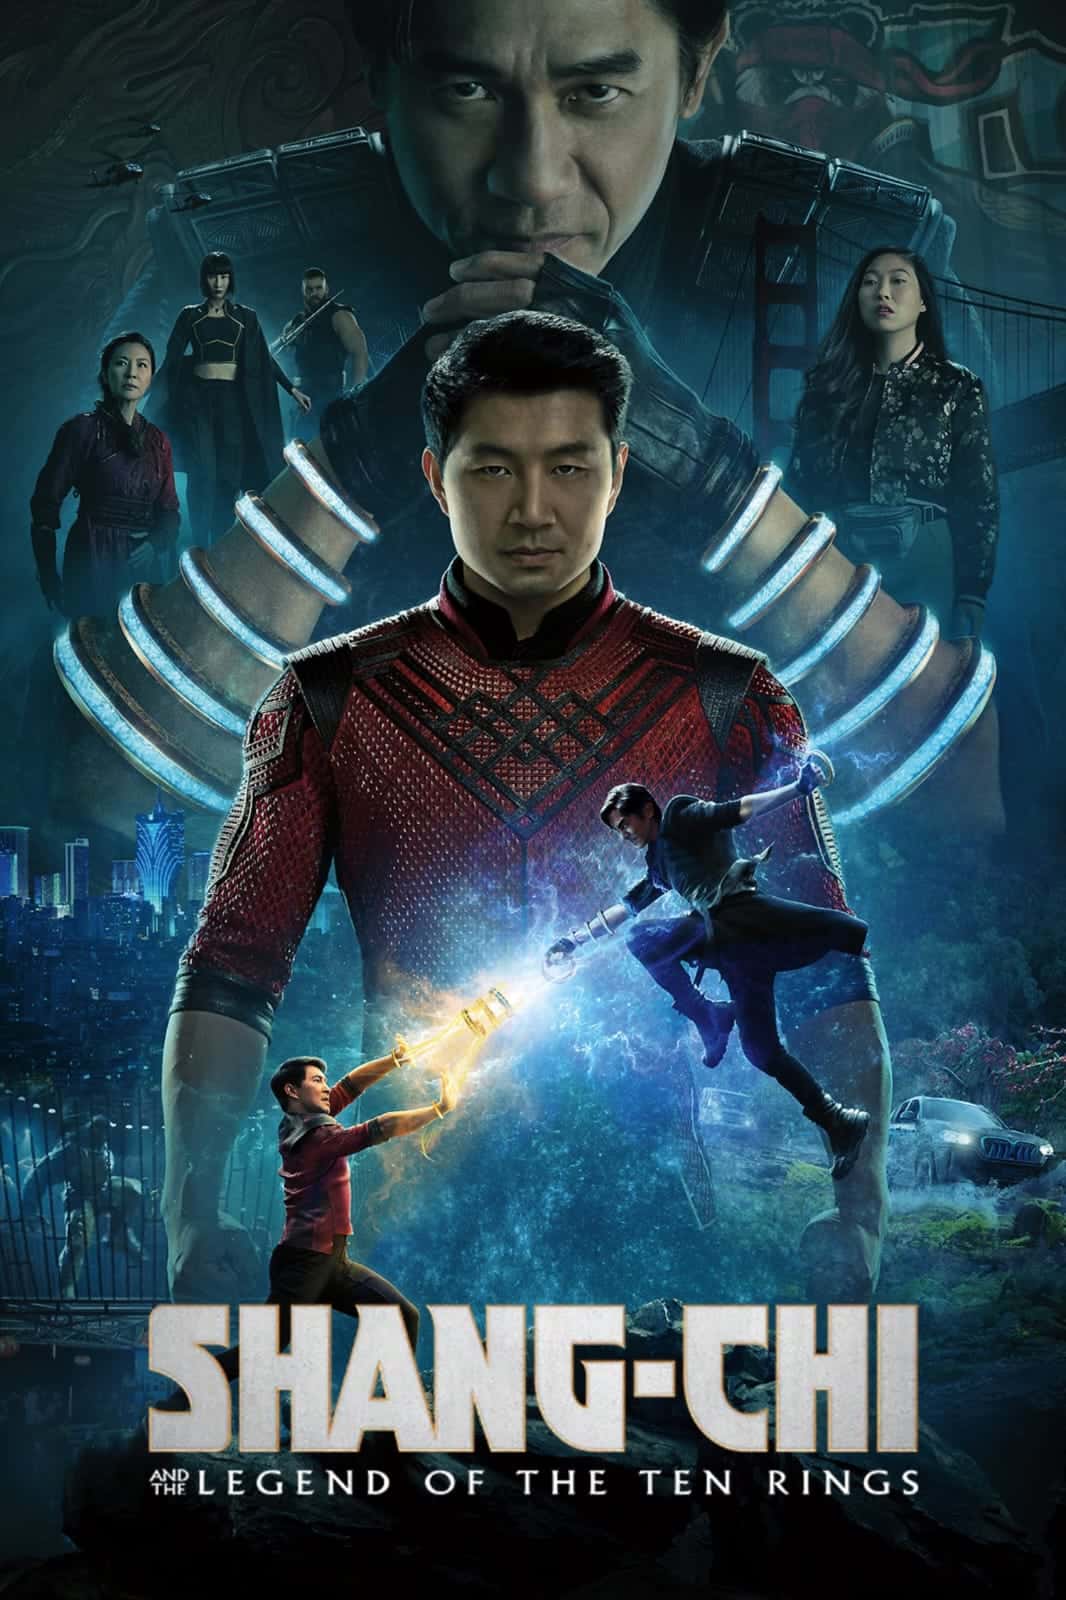 Shang-Chi and the Legend of the Ten Rings (2021) Dual Audio [Hindi + English] Full Movie BluRay ESub